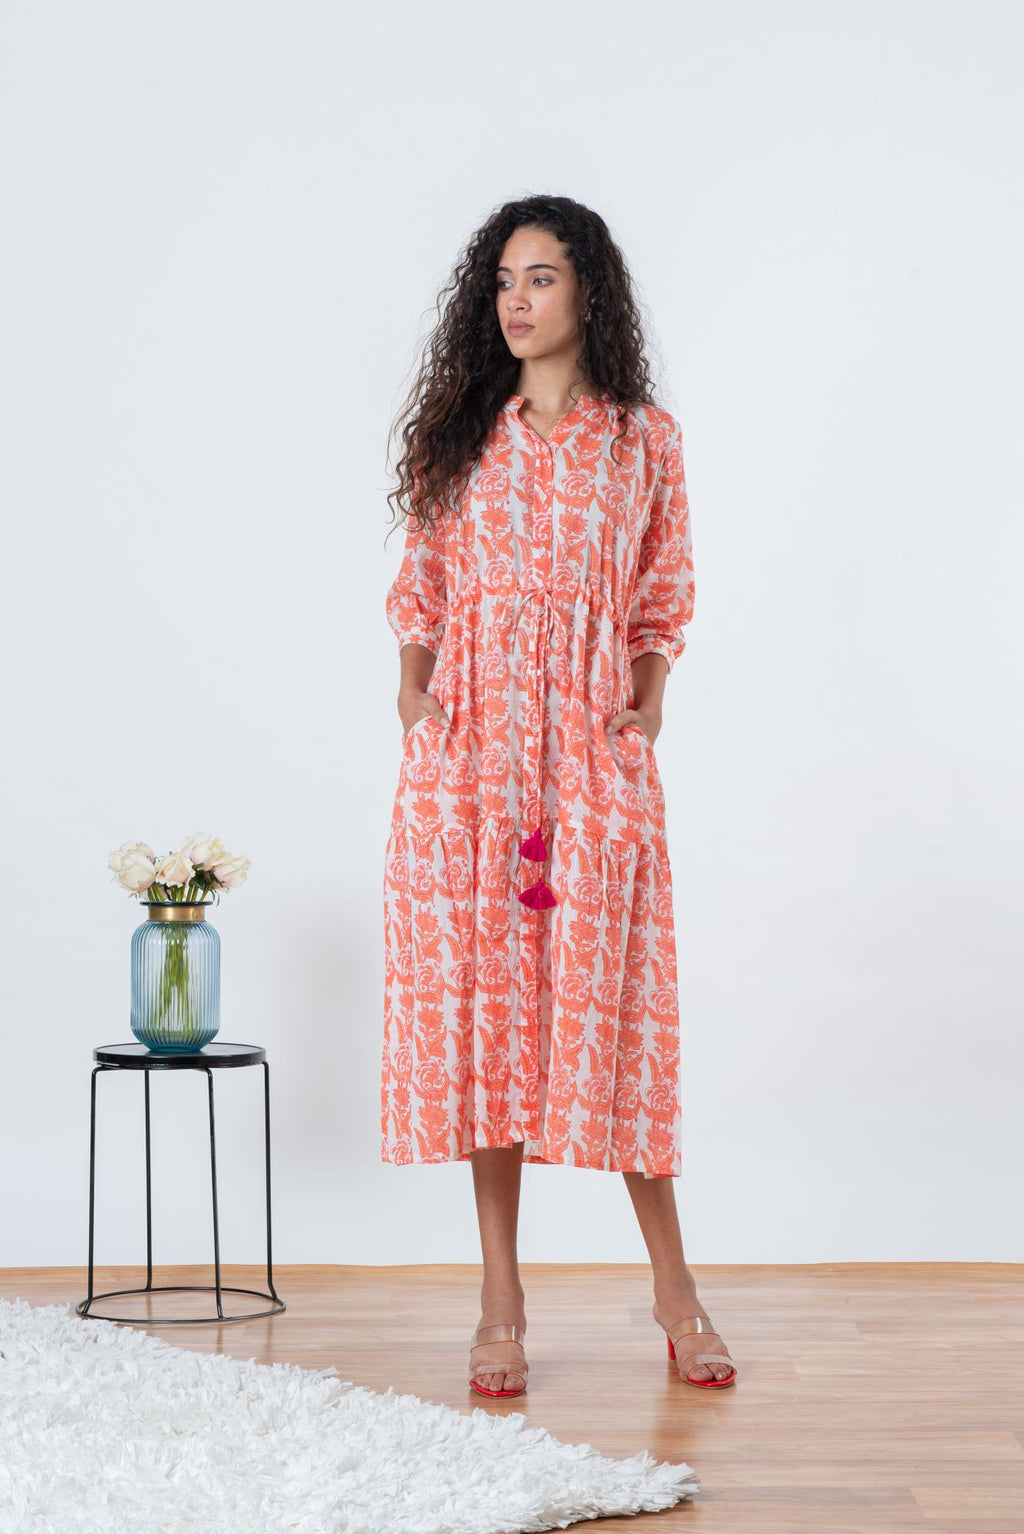 Beachwear party wear pool party beach side shop online India the beach company women dresses cute travel trip clothes cod free delivery discount Tuscany dress coral print white pink semi formal casual dress